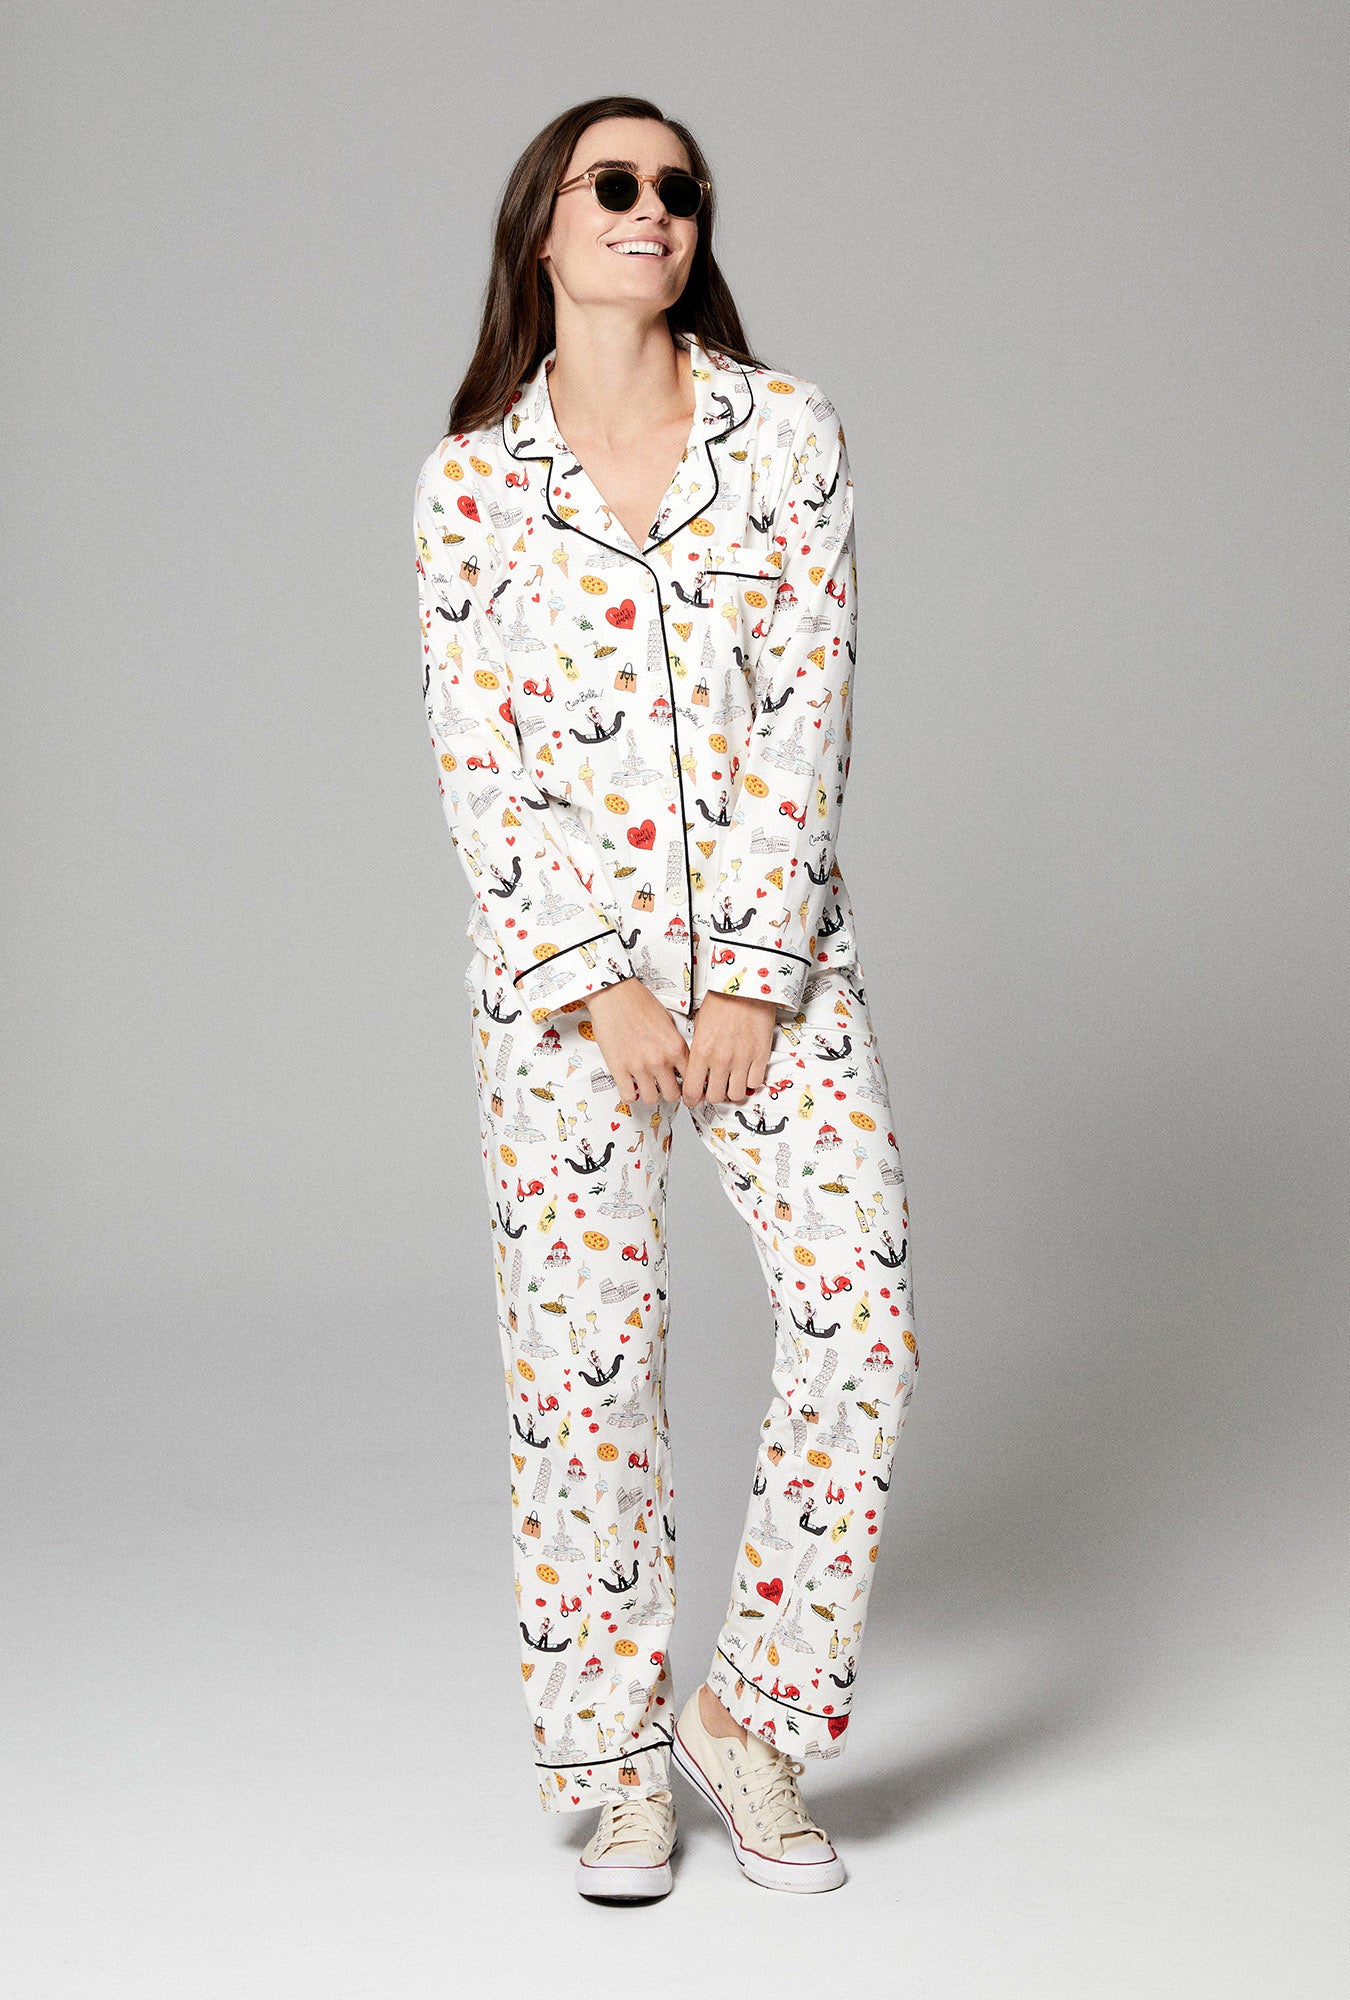 A lady wearing ivory long sleeve classic pj set with that's amore print